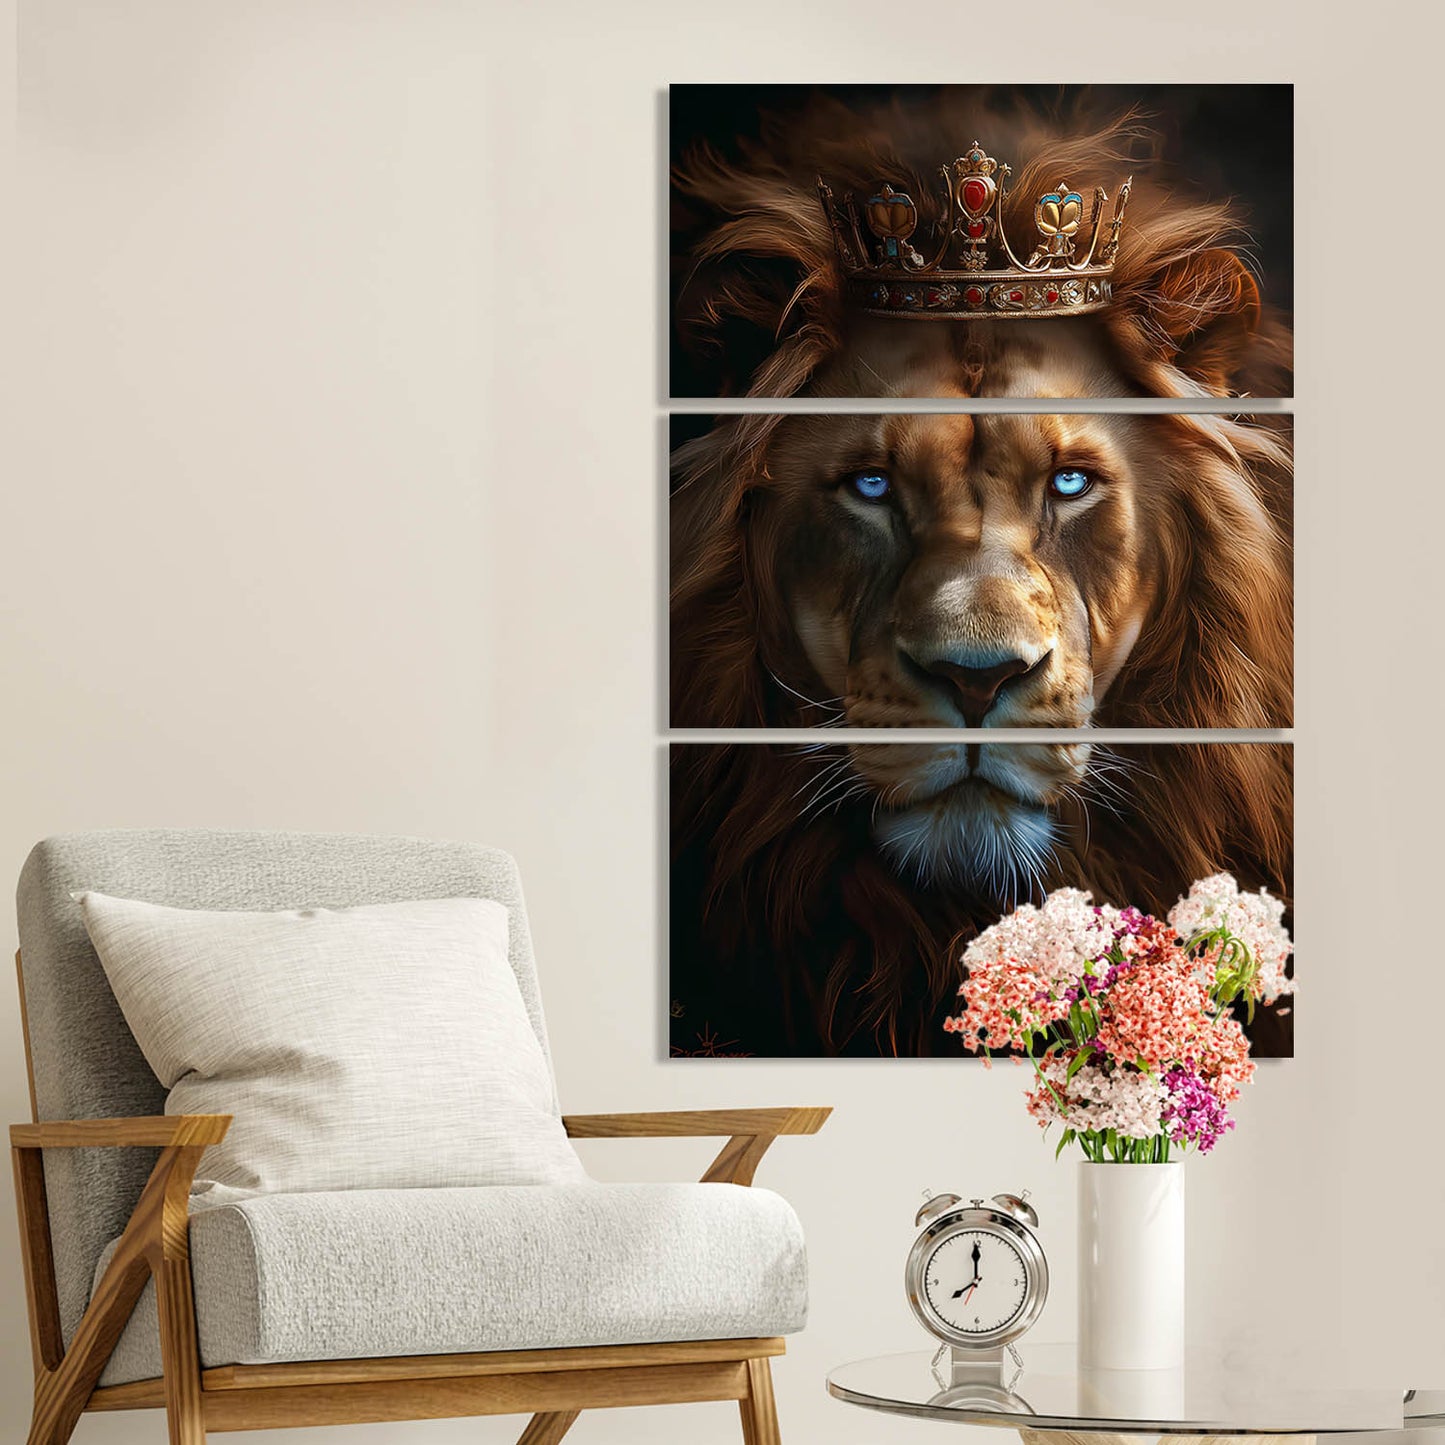 Lion Wall Art Canvas For Home Décor Office Living Room